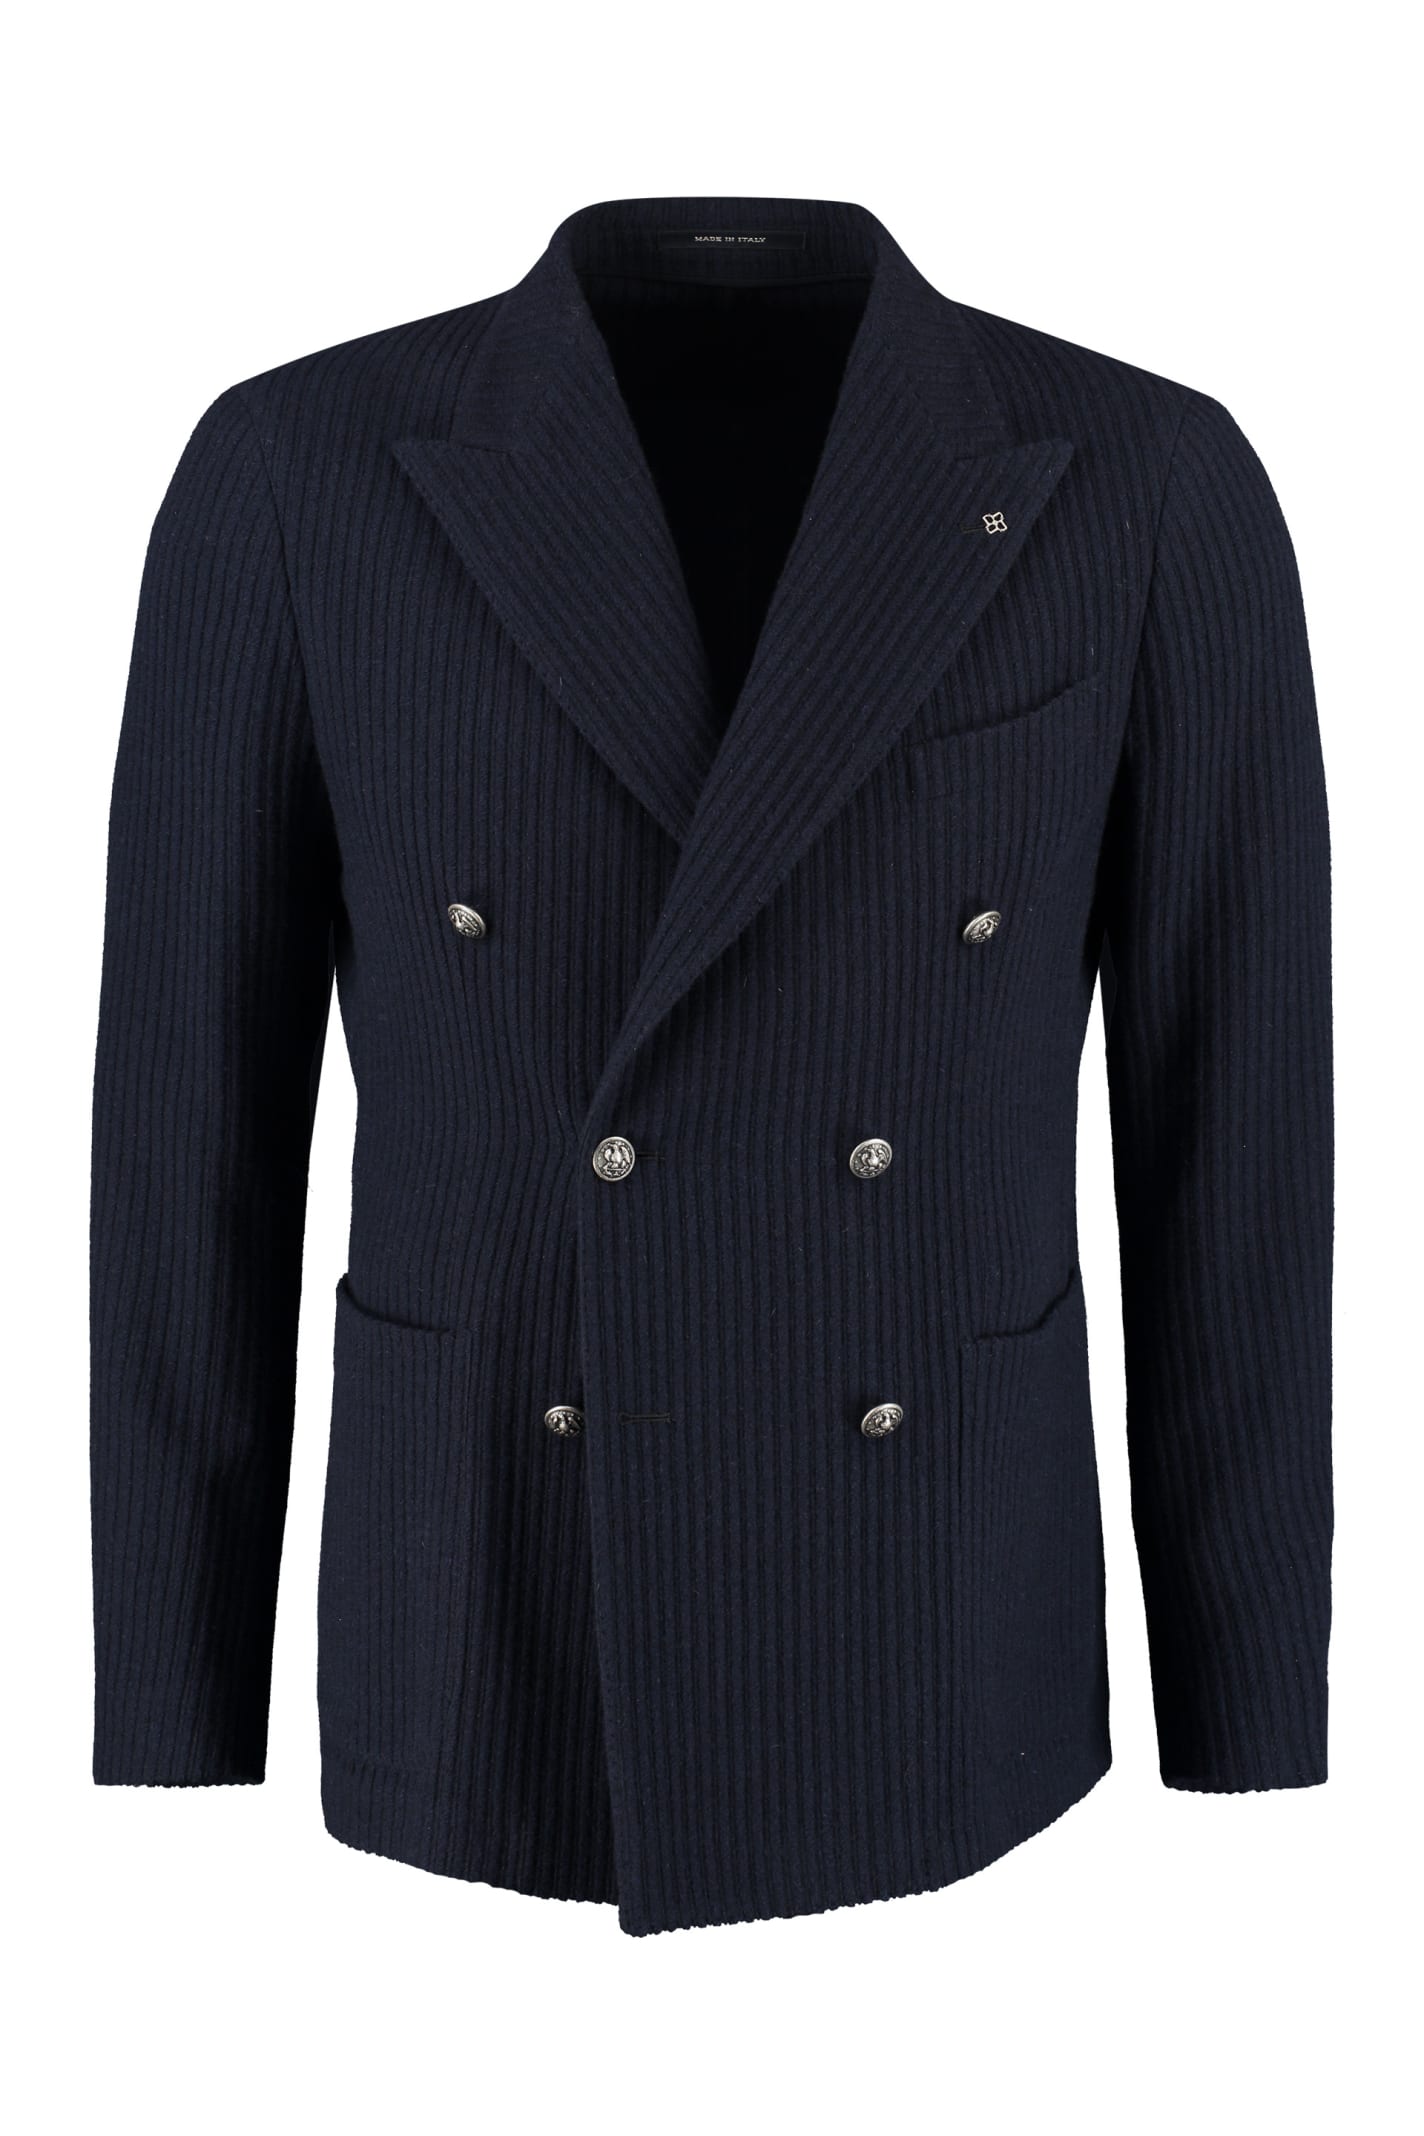 Tagliatore Double-breasted Corduroy Jacket